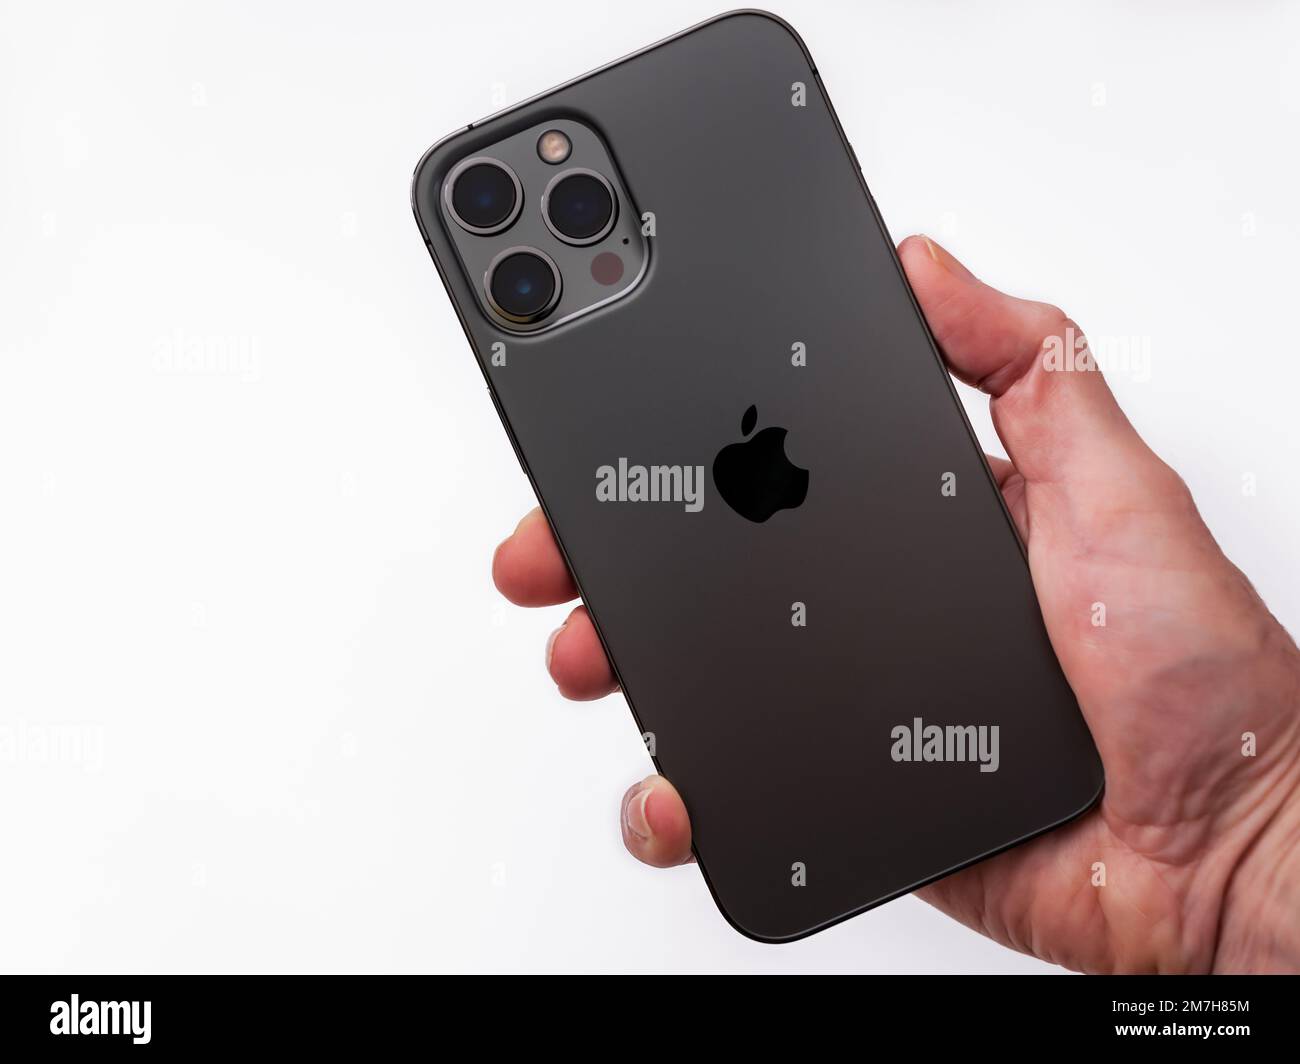 The iPhone 12 Pro Max is Apple’s most advanced and largest 5G cell phone. The phone features 3 rear facing cameras and a LiDAR sensor. Stock Photo